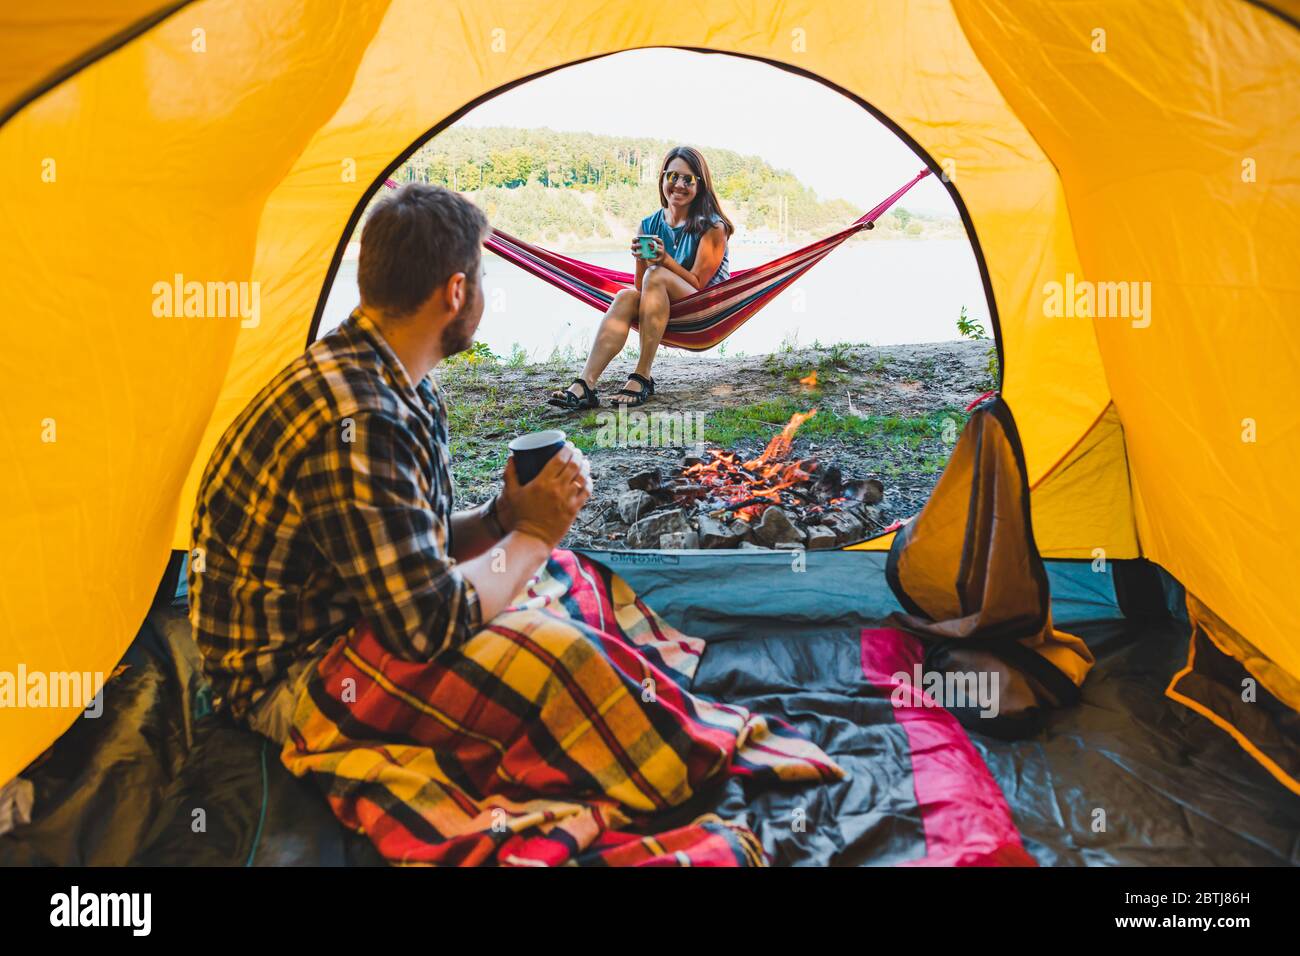 couple resting near fire. man sitting in tent woman laying on hammock Stock Photo